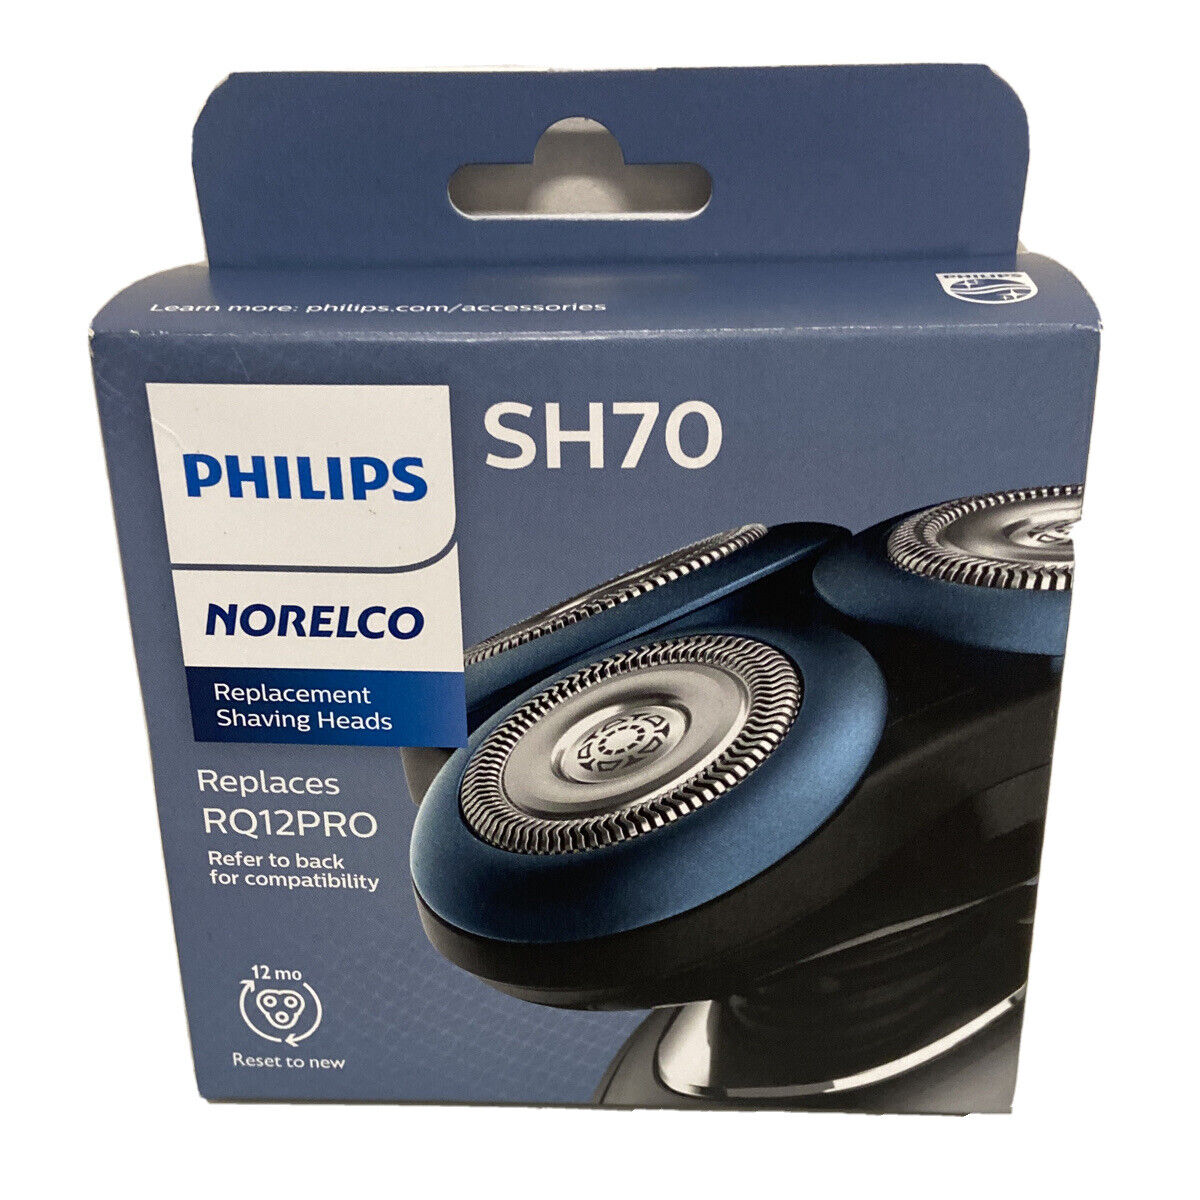 Genuine Philips Alternative dealer Norelco SH70 Sealed Head Shaving Replacement Outlet ☆ Free Shipping